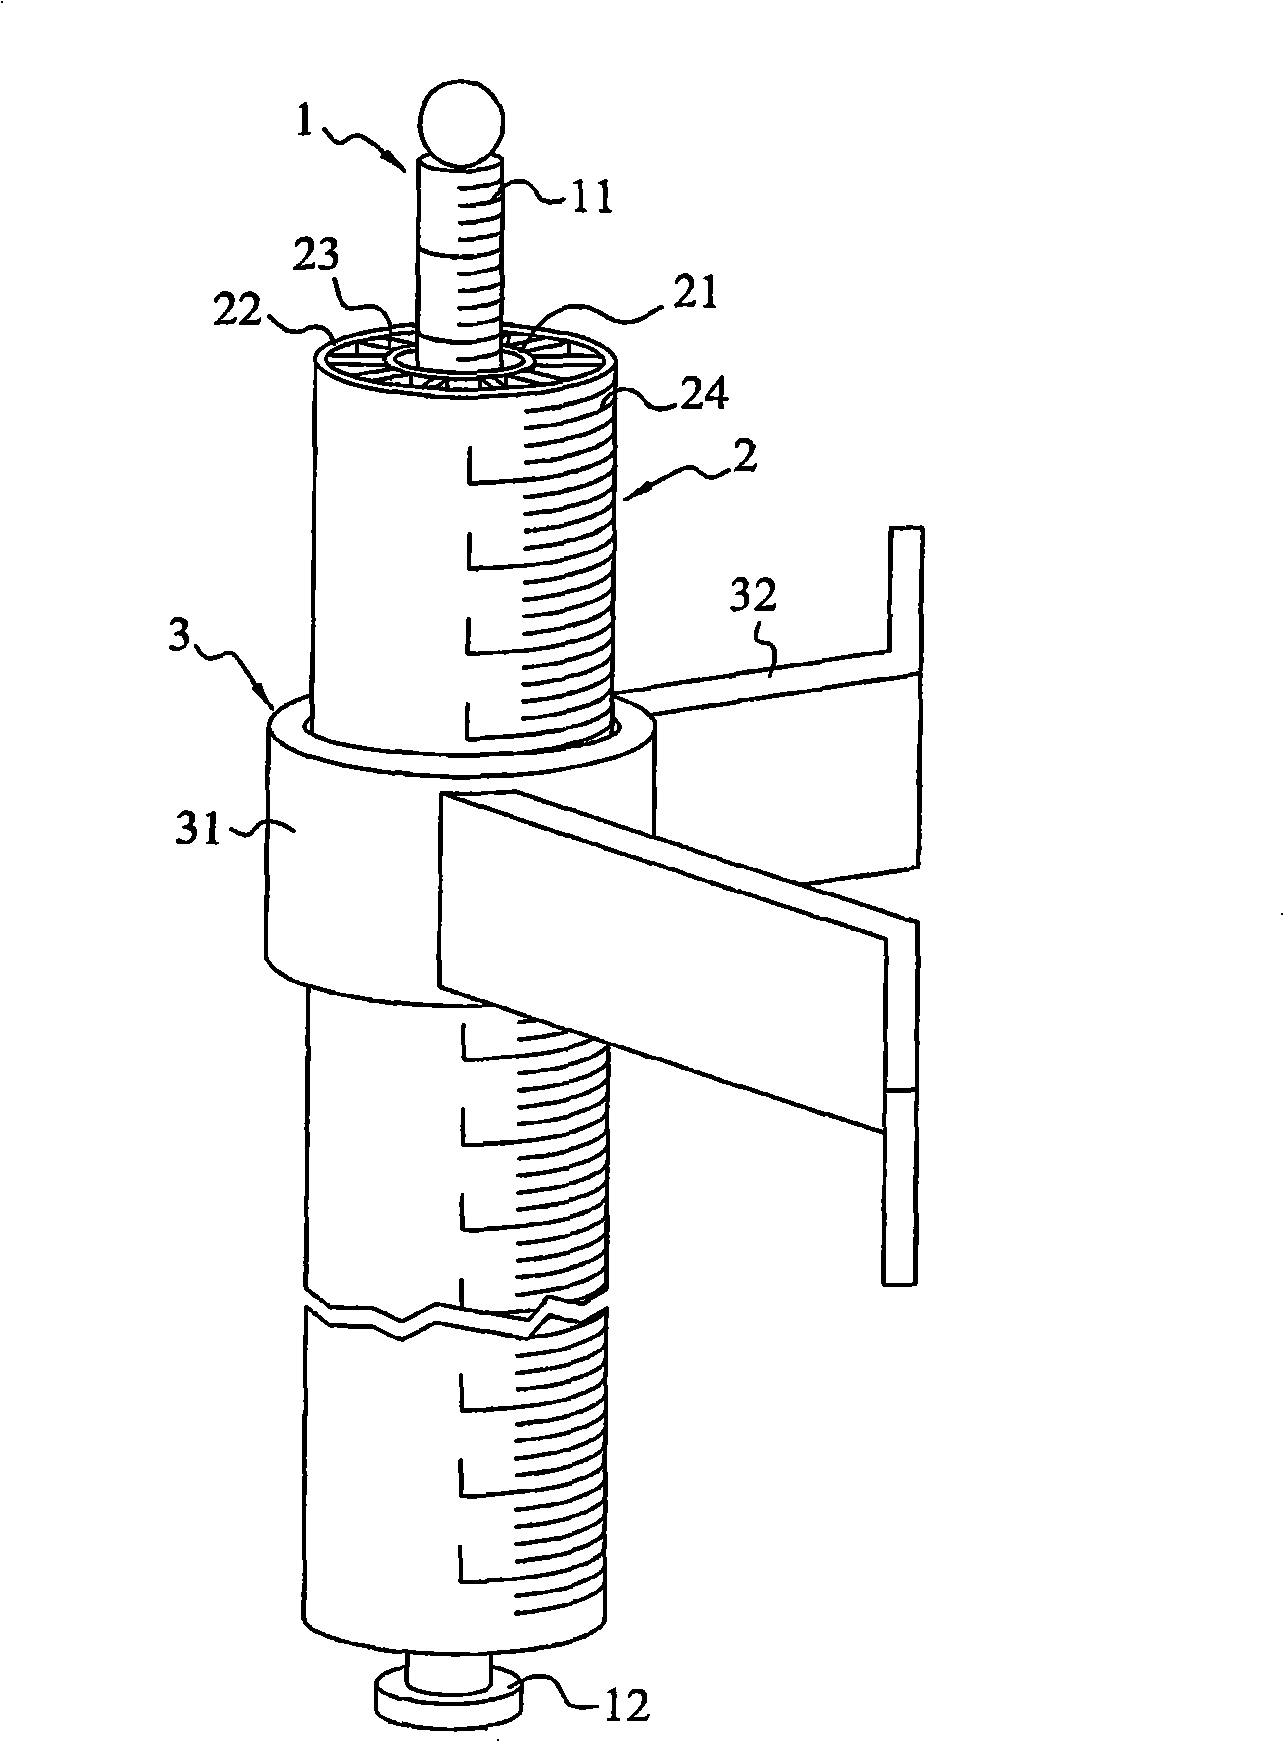 Monitoring device for monitoring river-bed scouring depth, remote automatic monitoring system and bridge